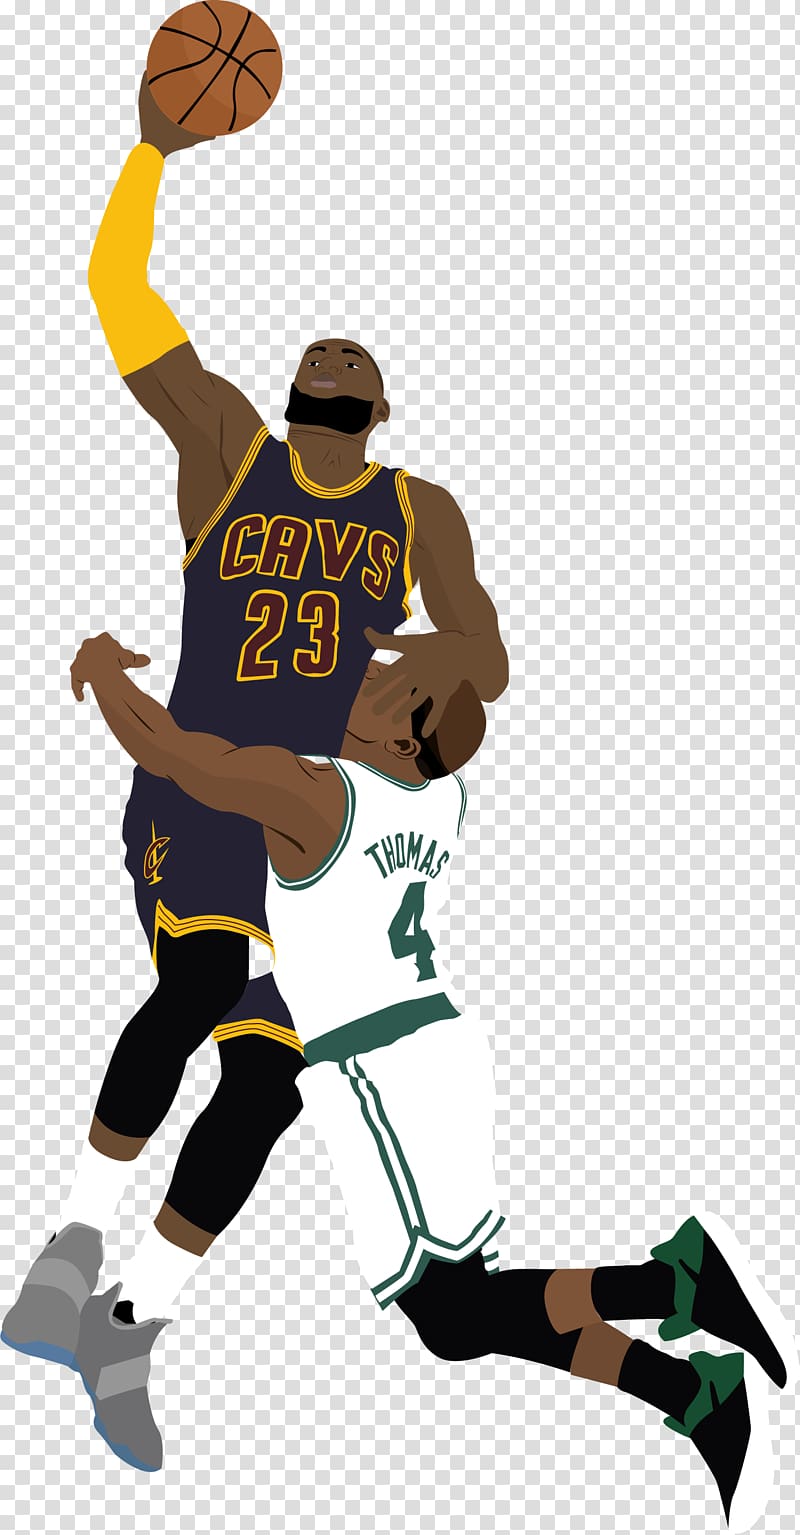 iPhone Cleveland Cavaliers NBA All-Star Game Basketball Slam dunk, lebron james transparent background PNG clipart